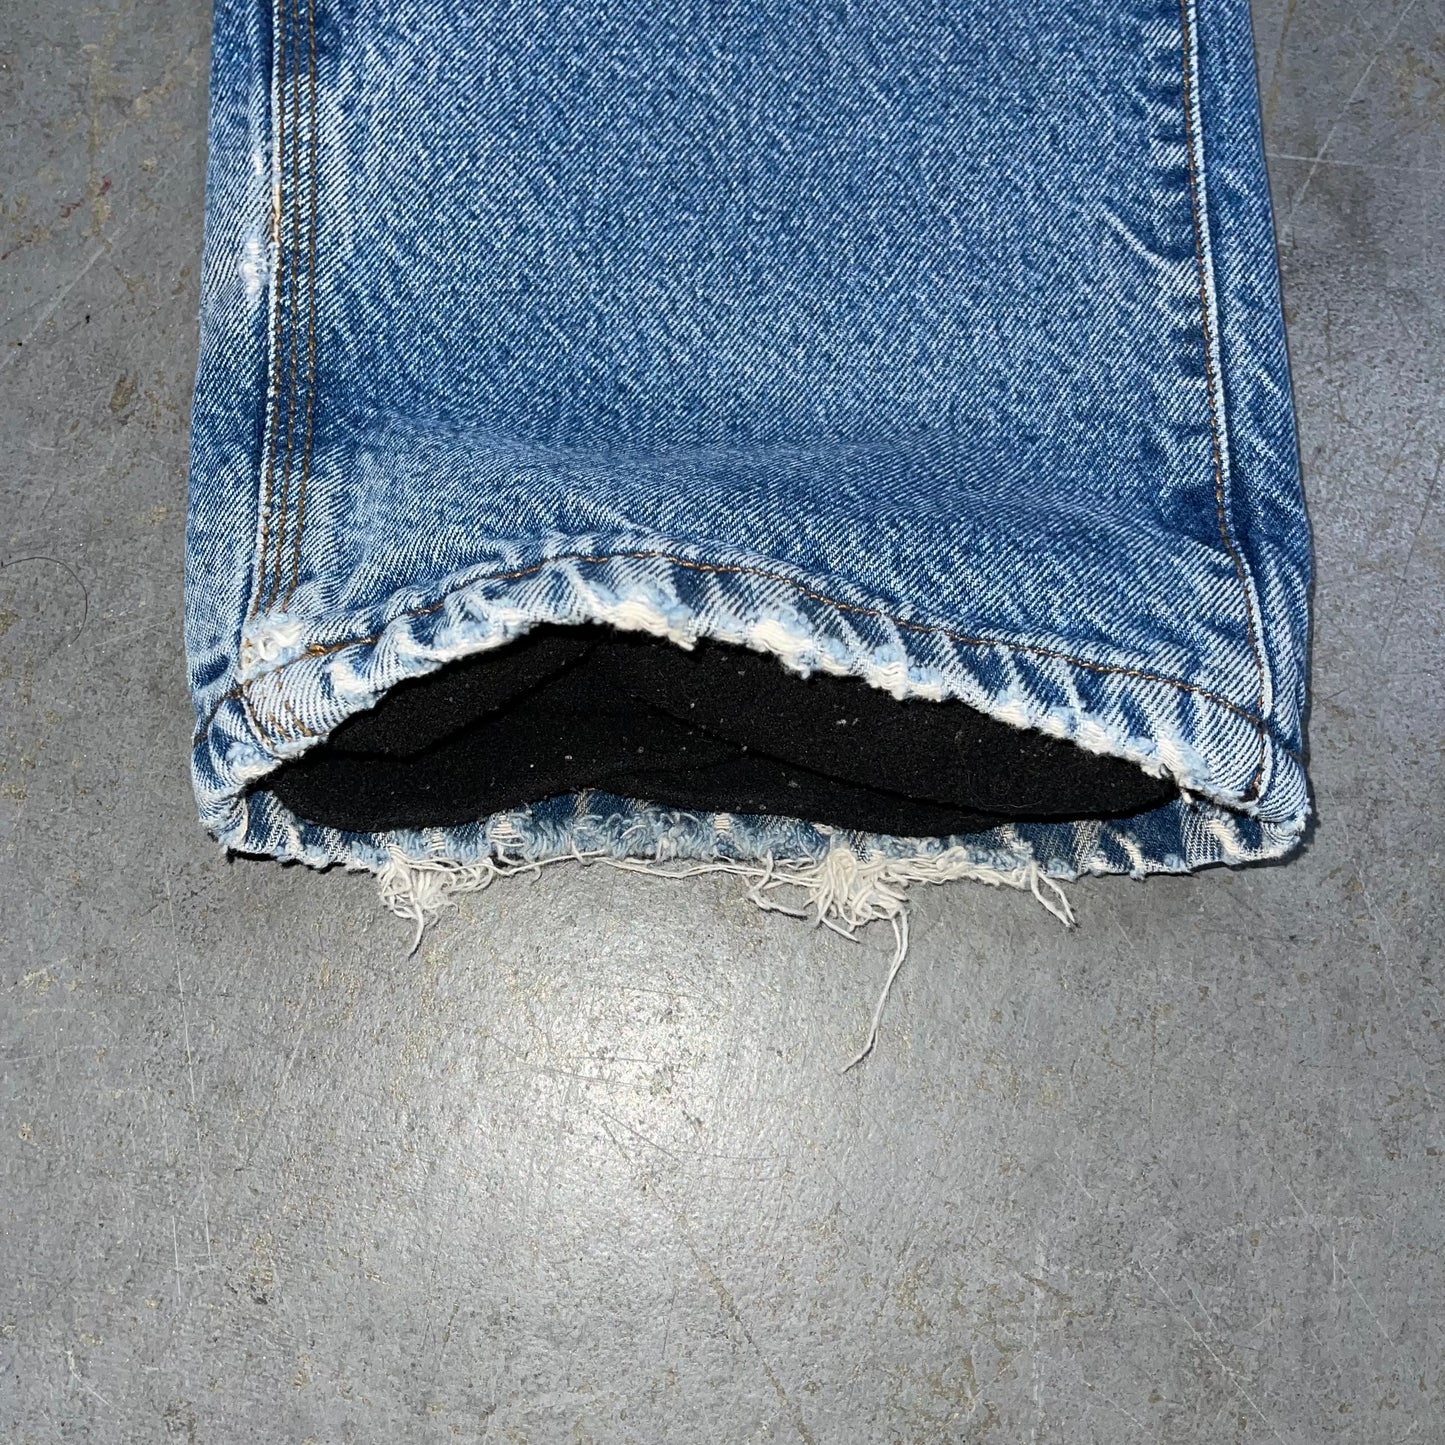 Five Brothers Fleece Lined Jeans. Size 34 x 32